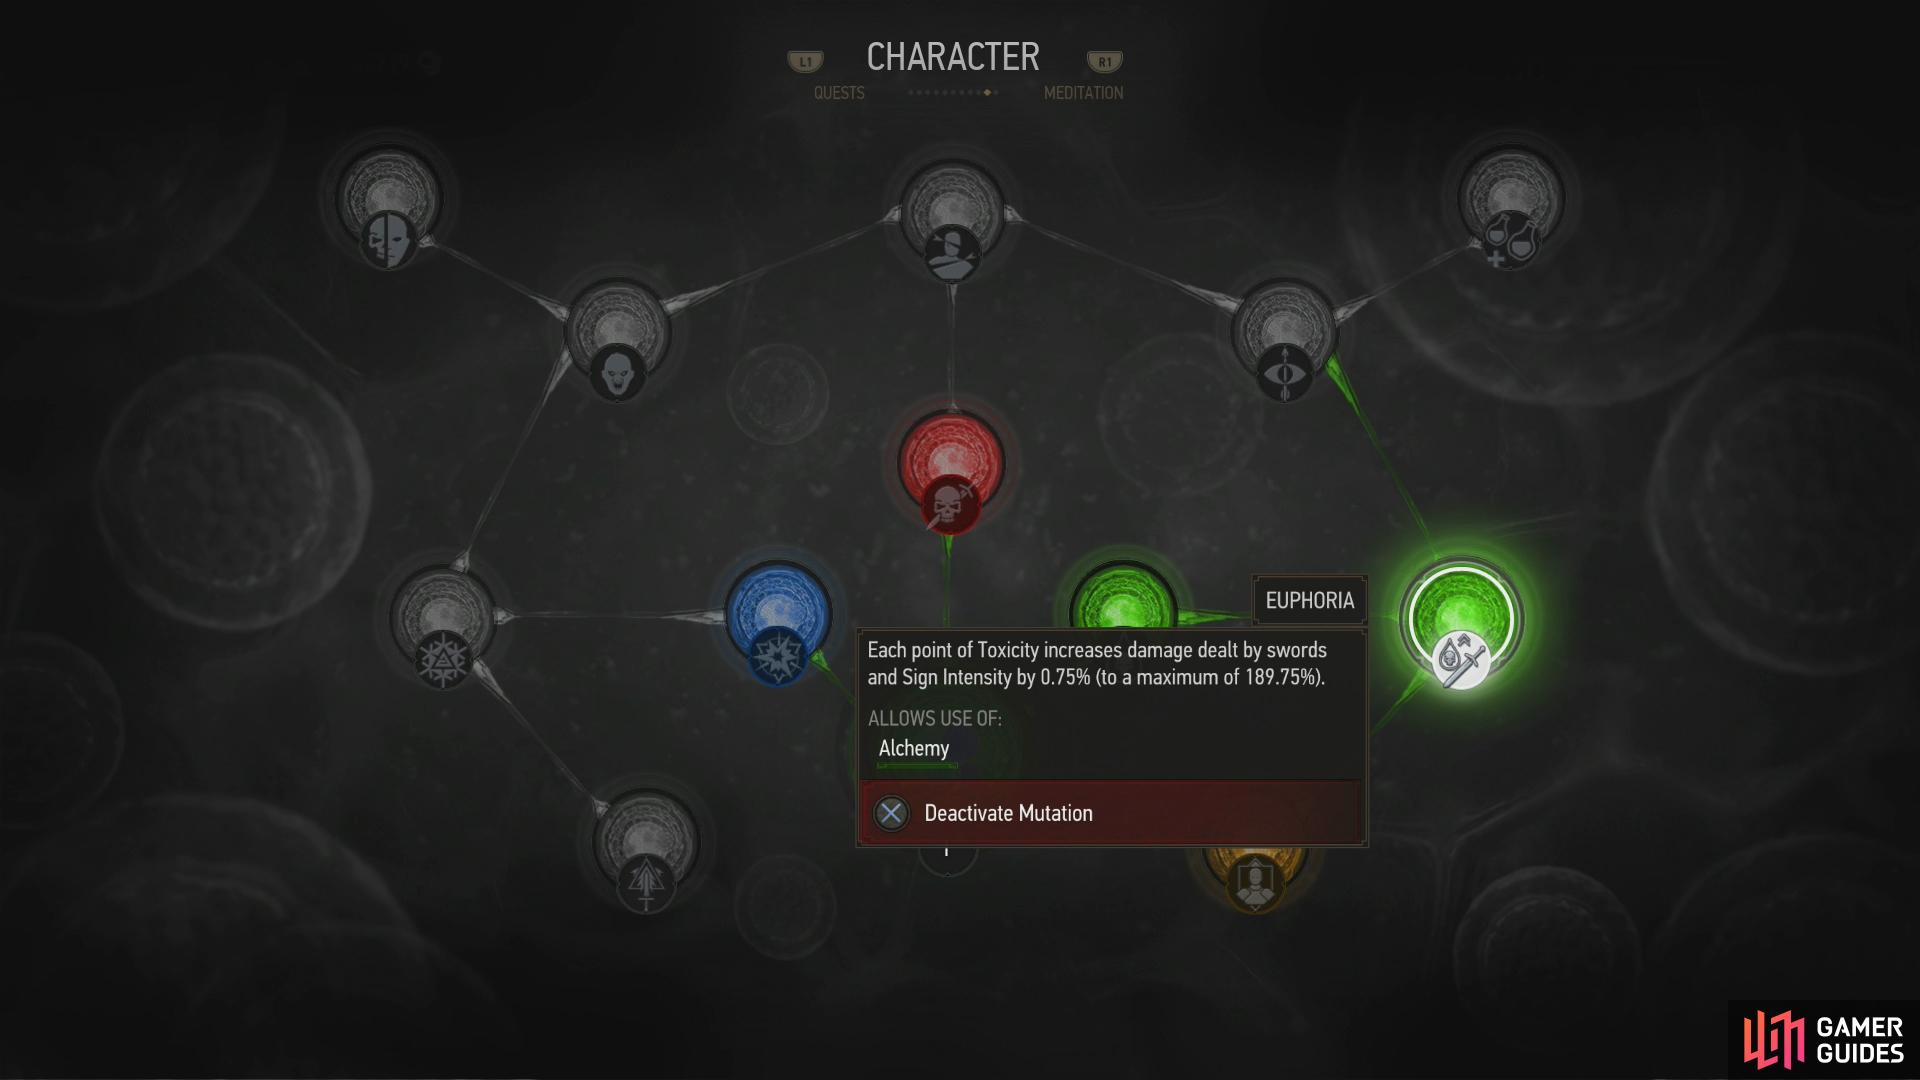 You'll unlock the Mutations Tree, where you can spend Ability Points and Greater Mutagens to unlock new abilities.